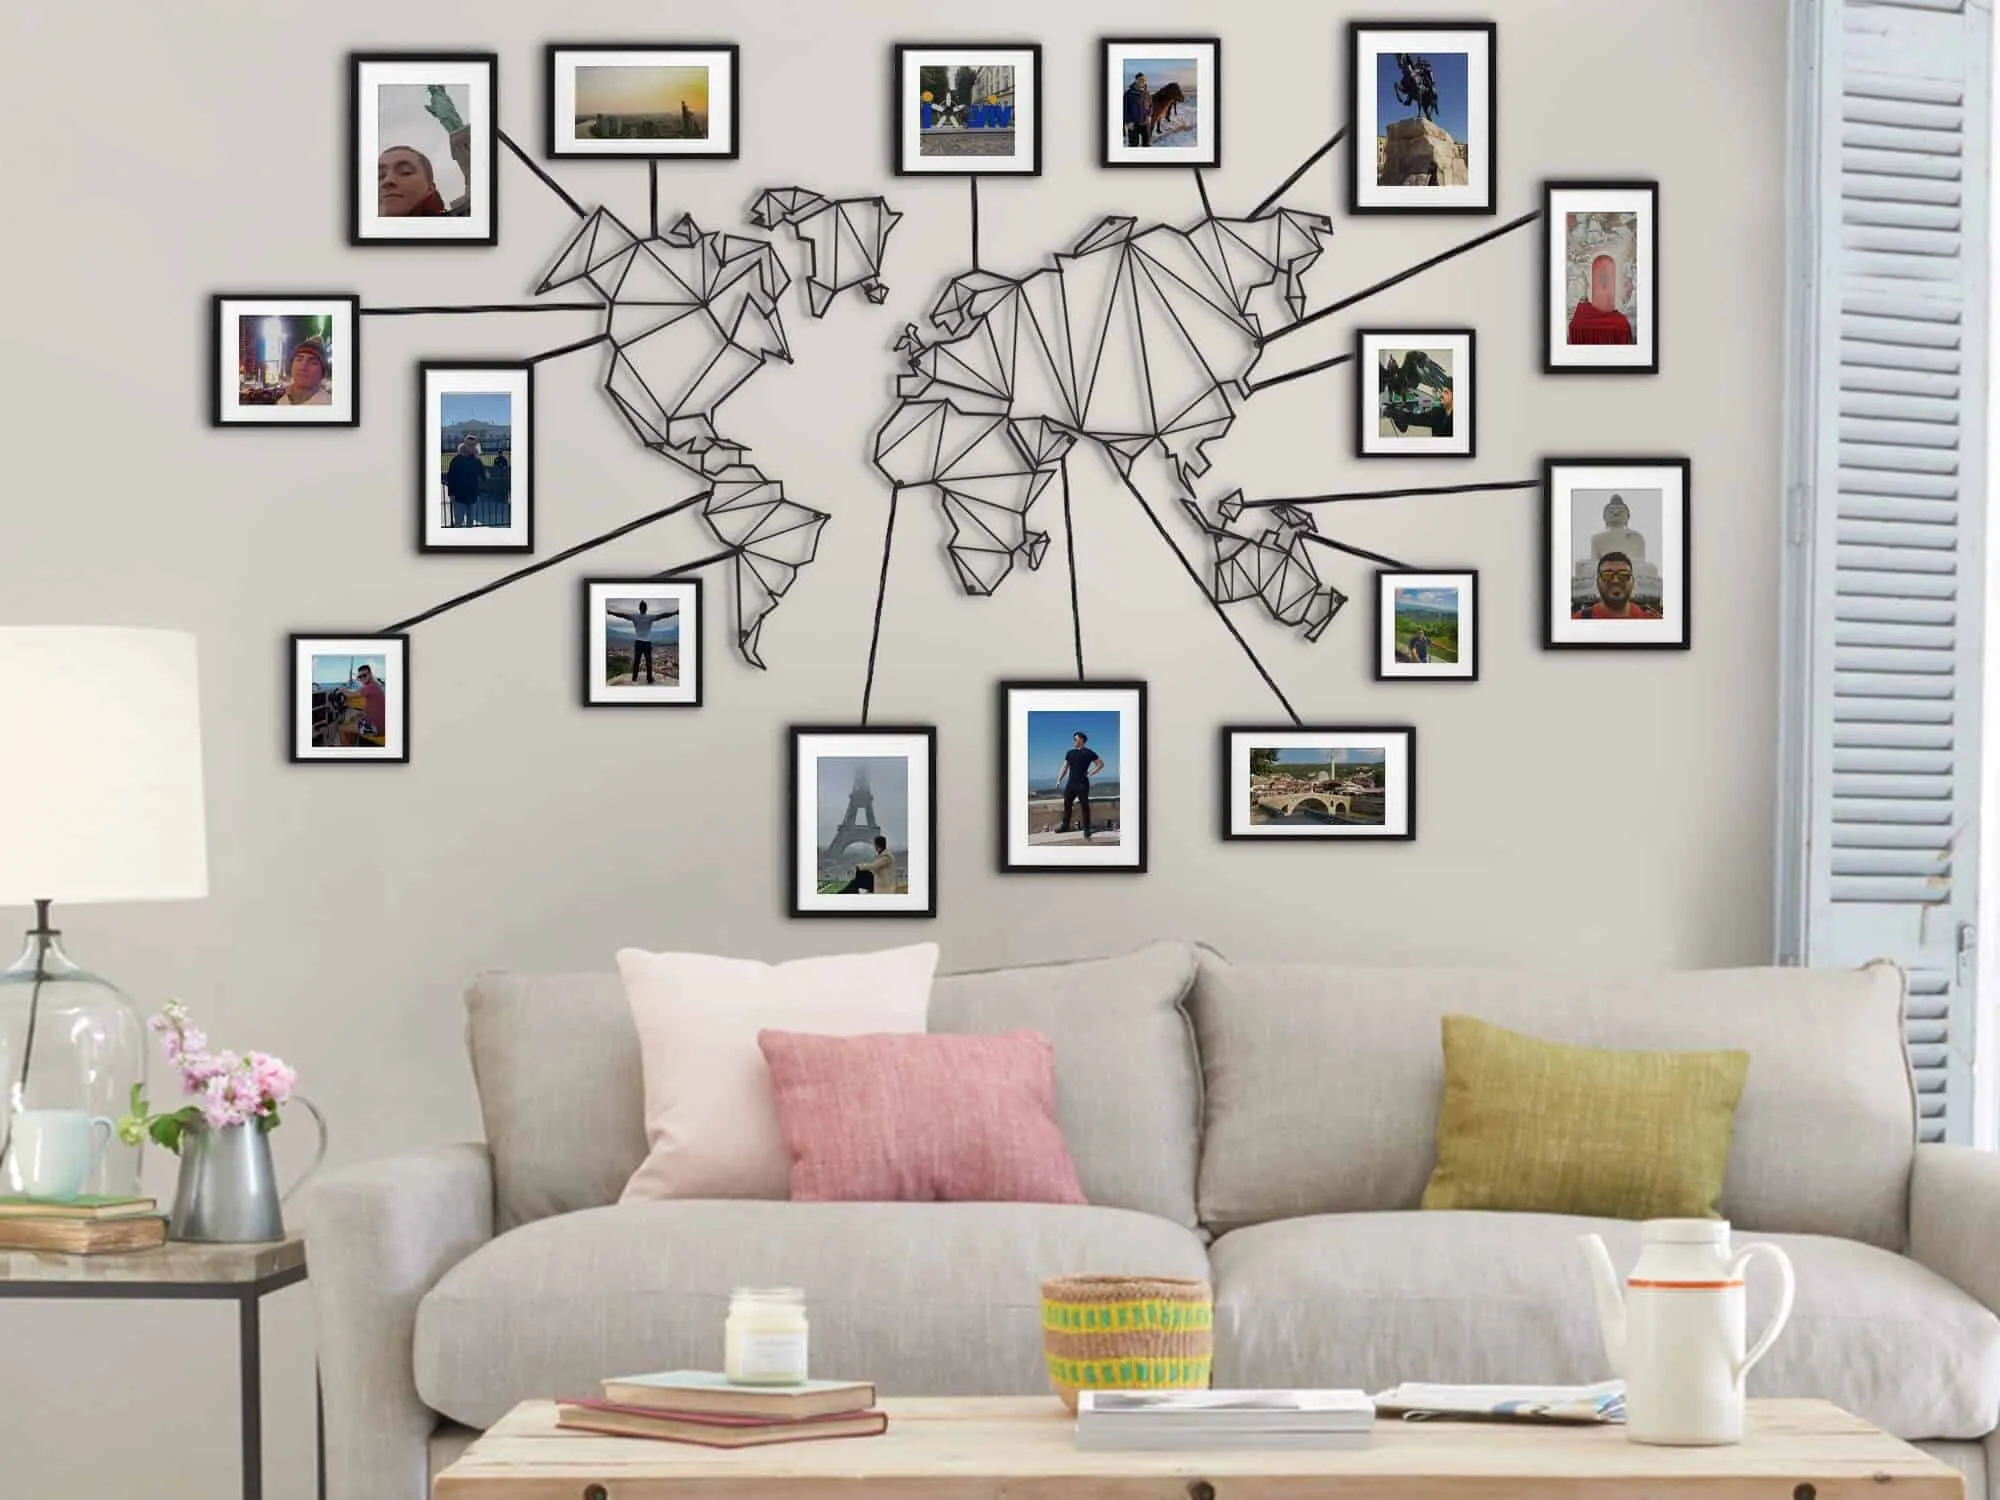 world map wall decoration with metal work in a living room with grey walls and sofa